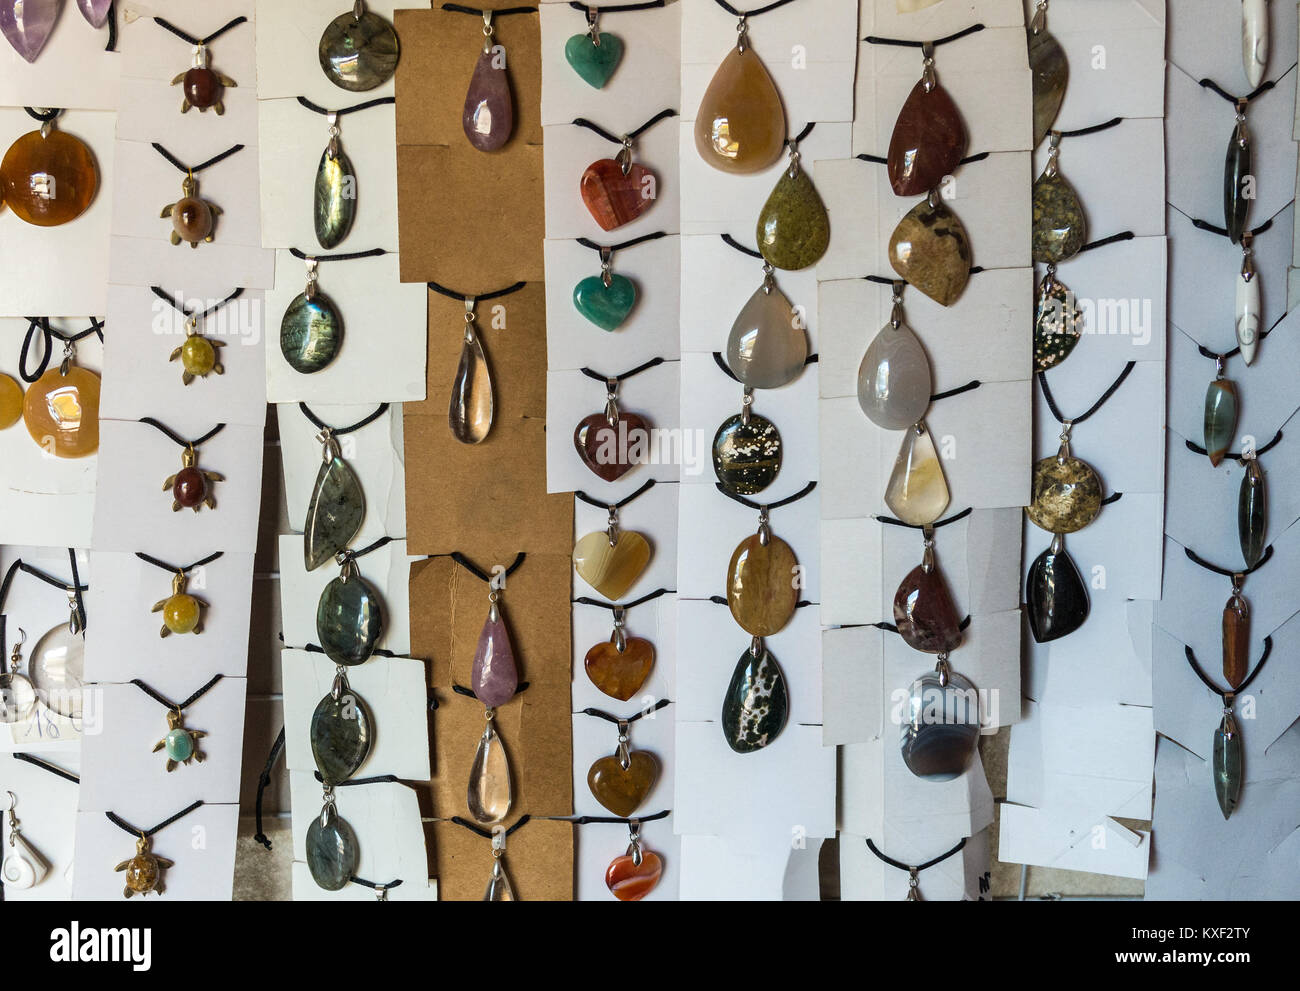 A variety of pendents made of local rocks and minerals are for sale at a souvenir store. Madagascar, Africa. Stock Photo